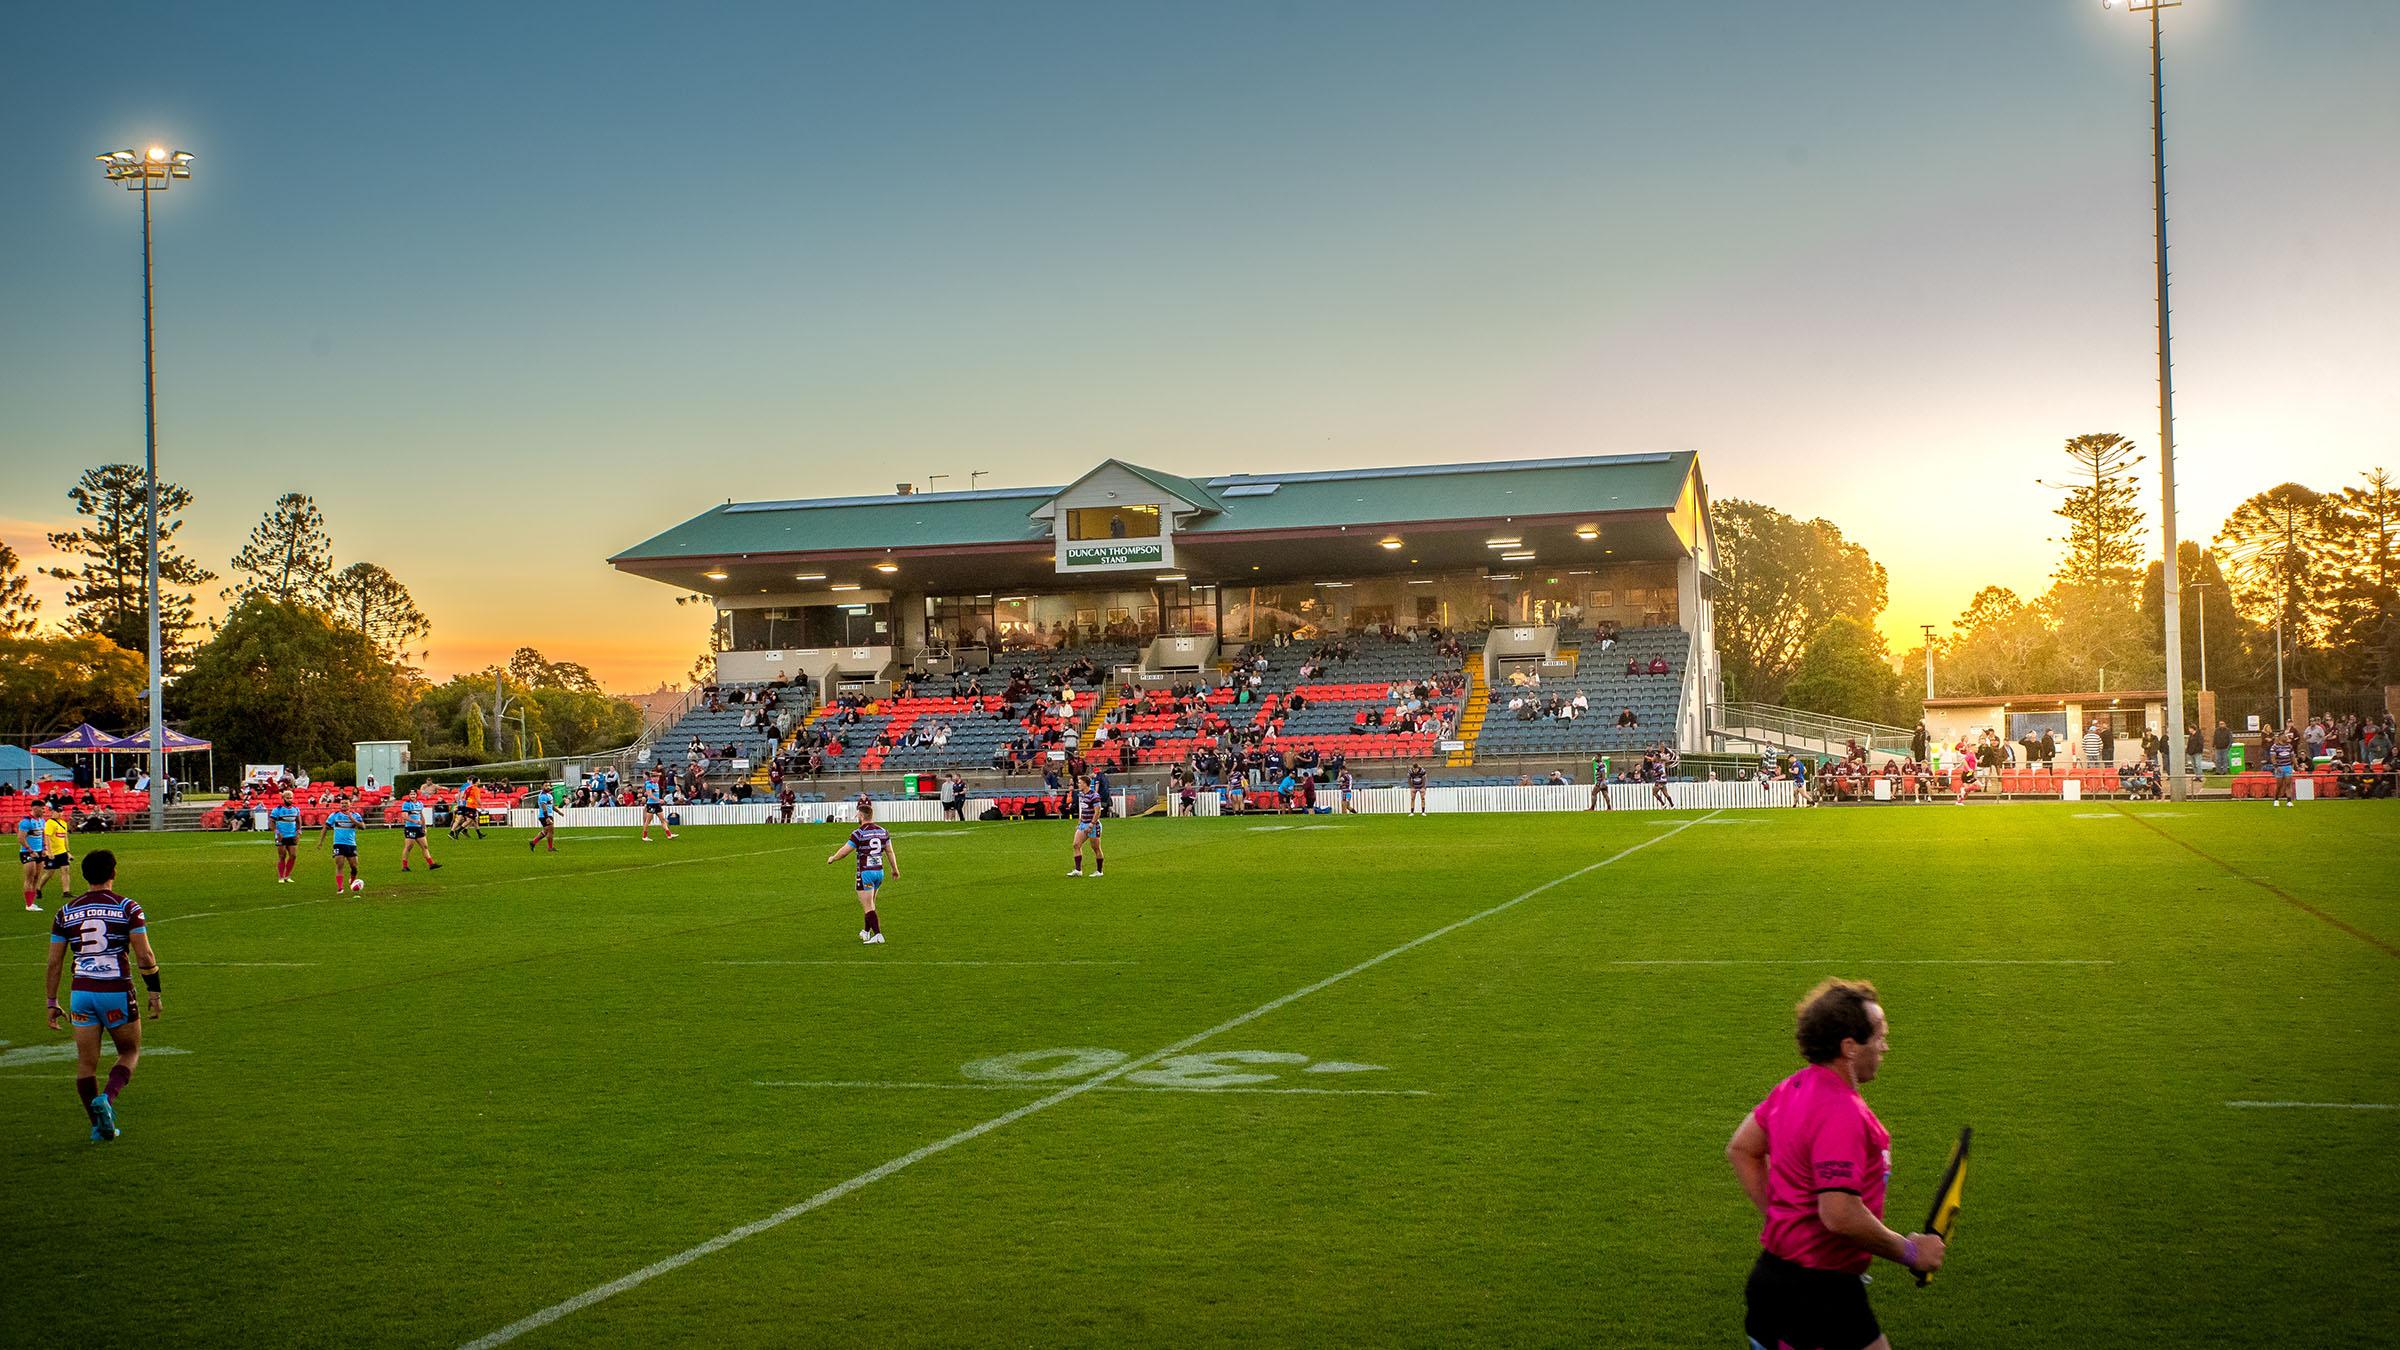 Stadium view of the Toowoomba sports ground, with athletes on the field playing a rugby match